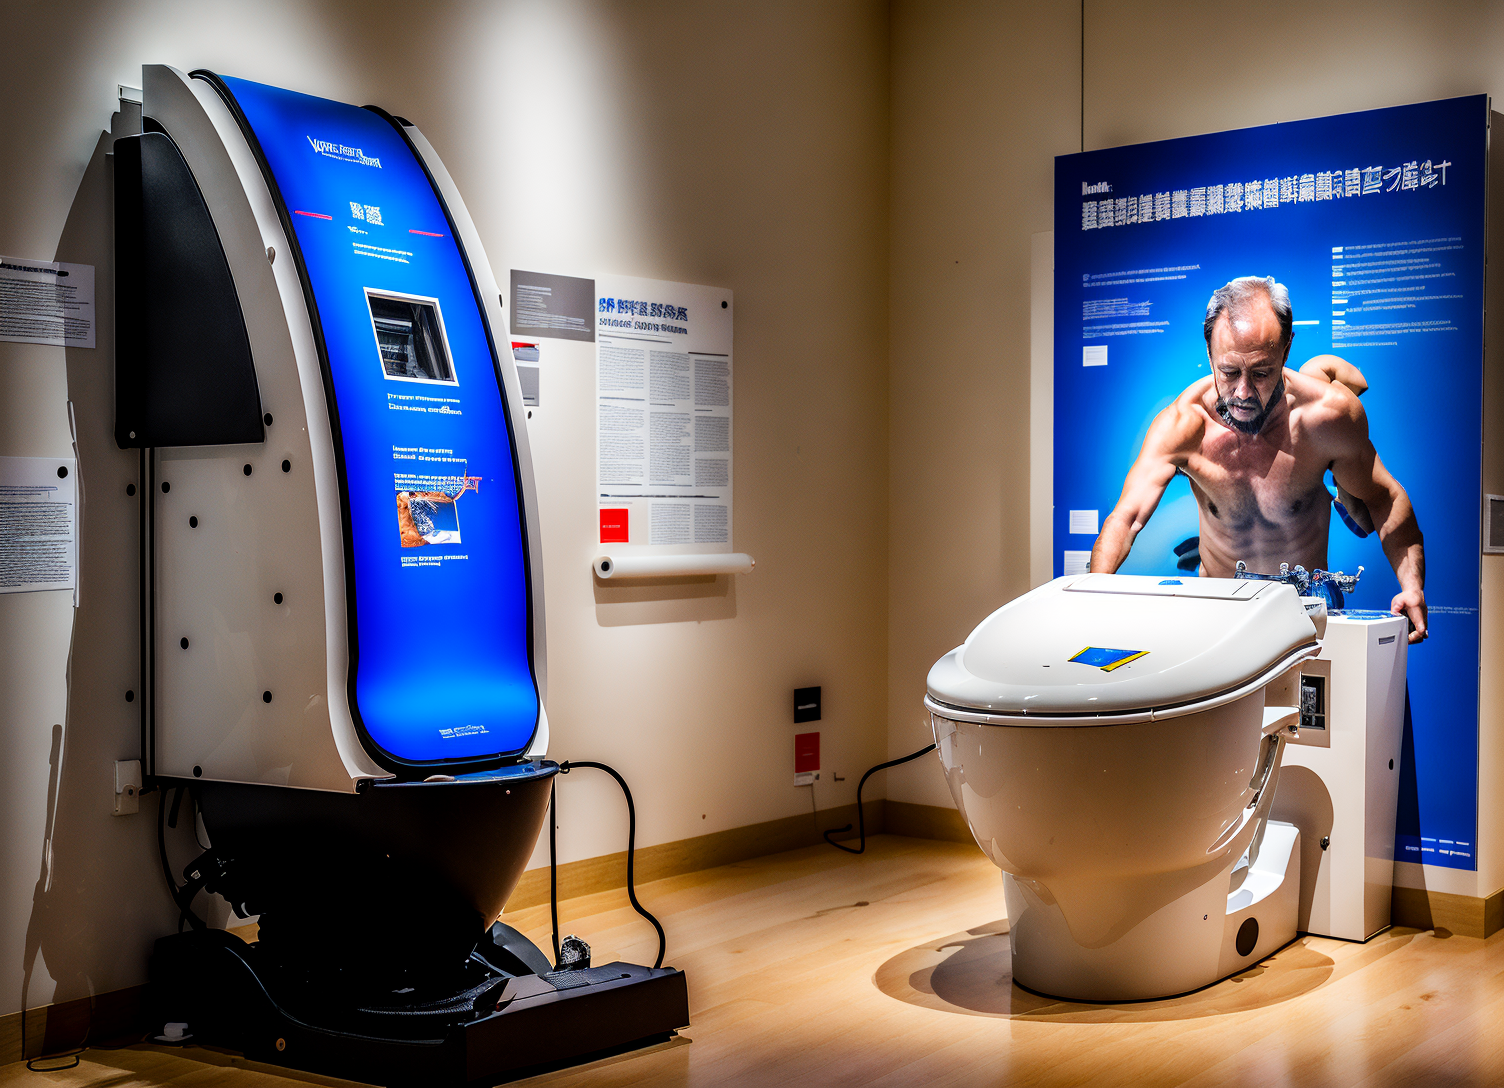 (photo:1.2) of a museum display showcasing a machine that vacuums the shit out of you on the toilet to solve constipation